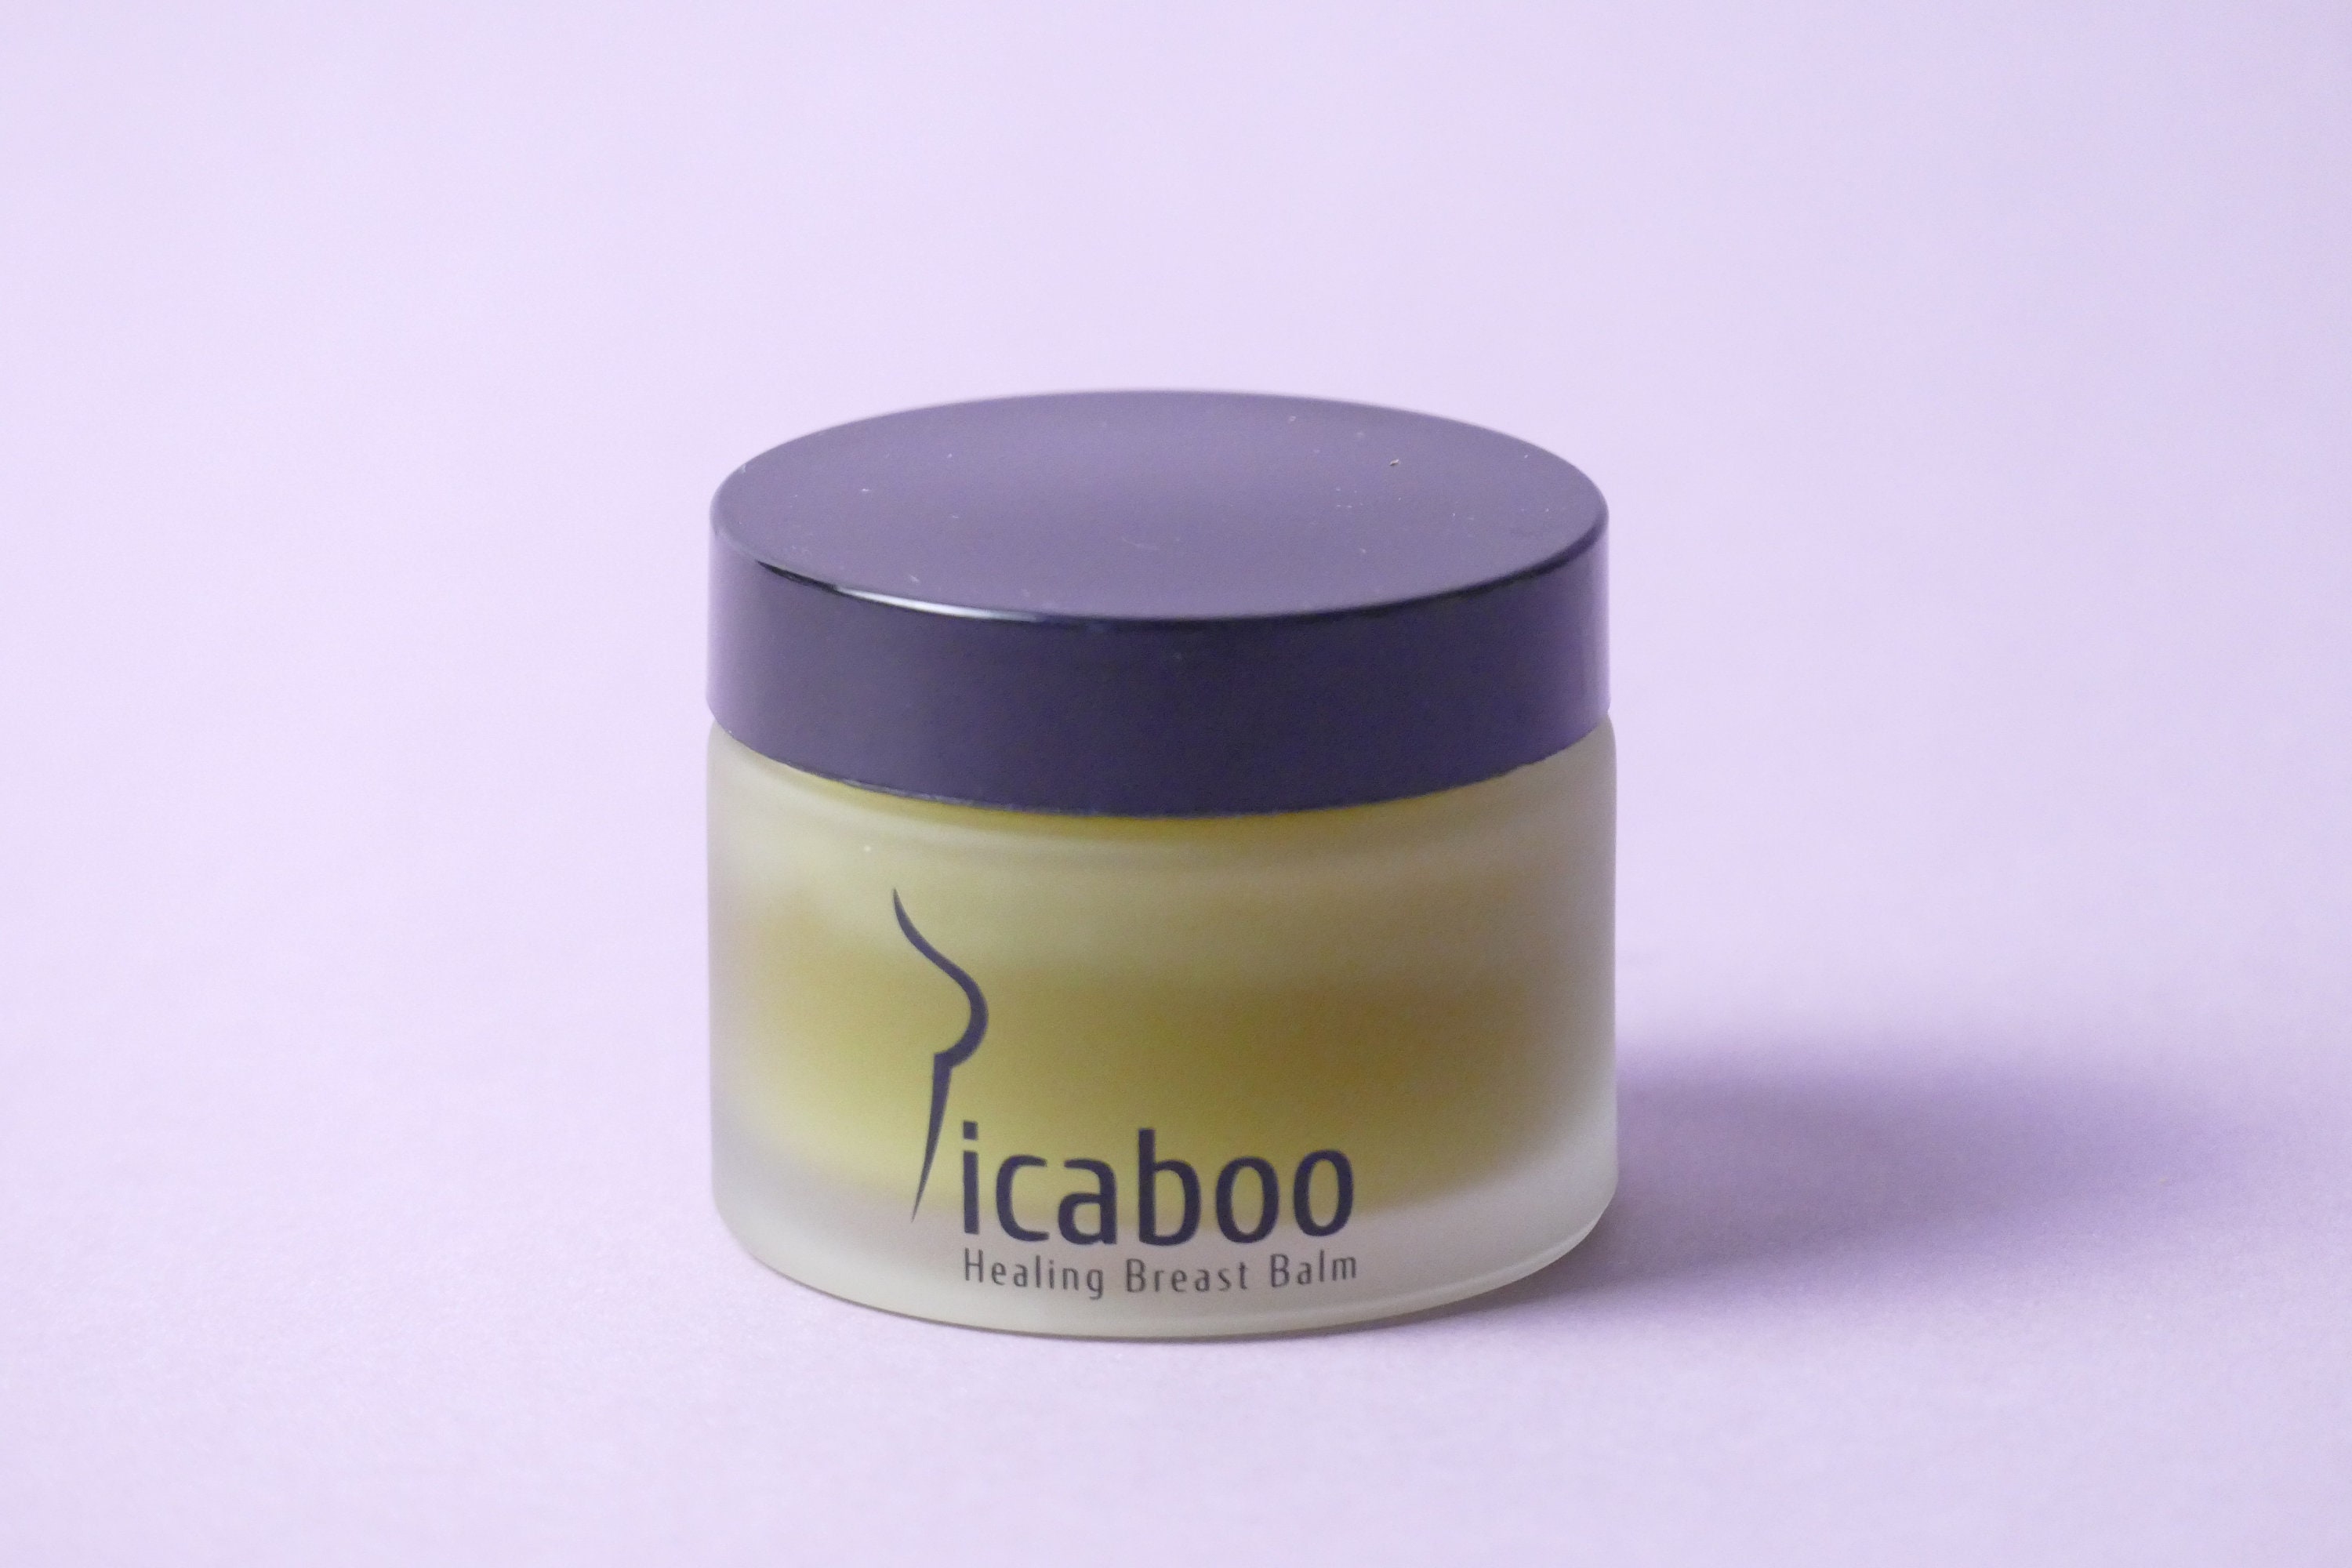  Picaboo Under Breast Rash Cream, Chafing Unisex, Natural  Deodorant, Skin Rash Relief, Excessive Sweating, Exercise, 1 oz, Made in  the USA : Handmade Products